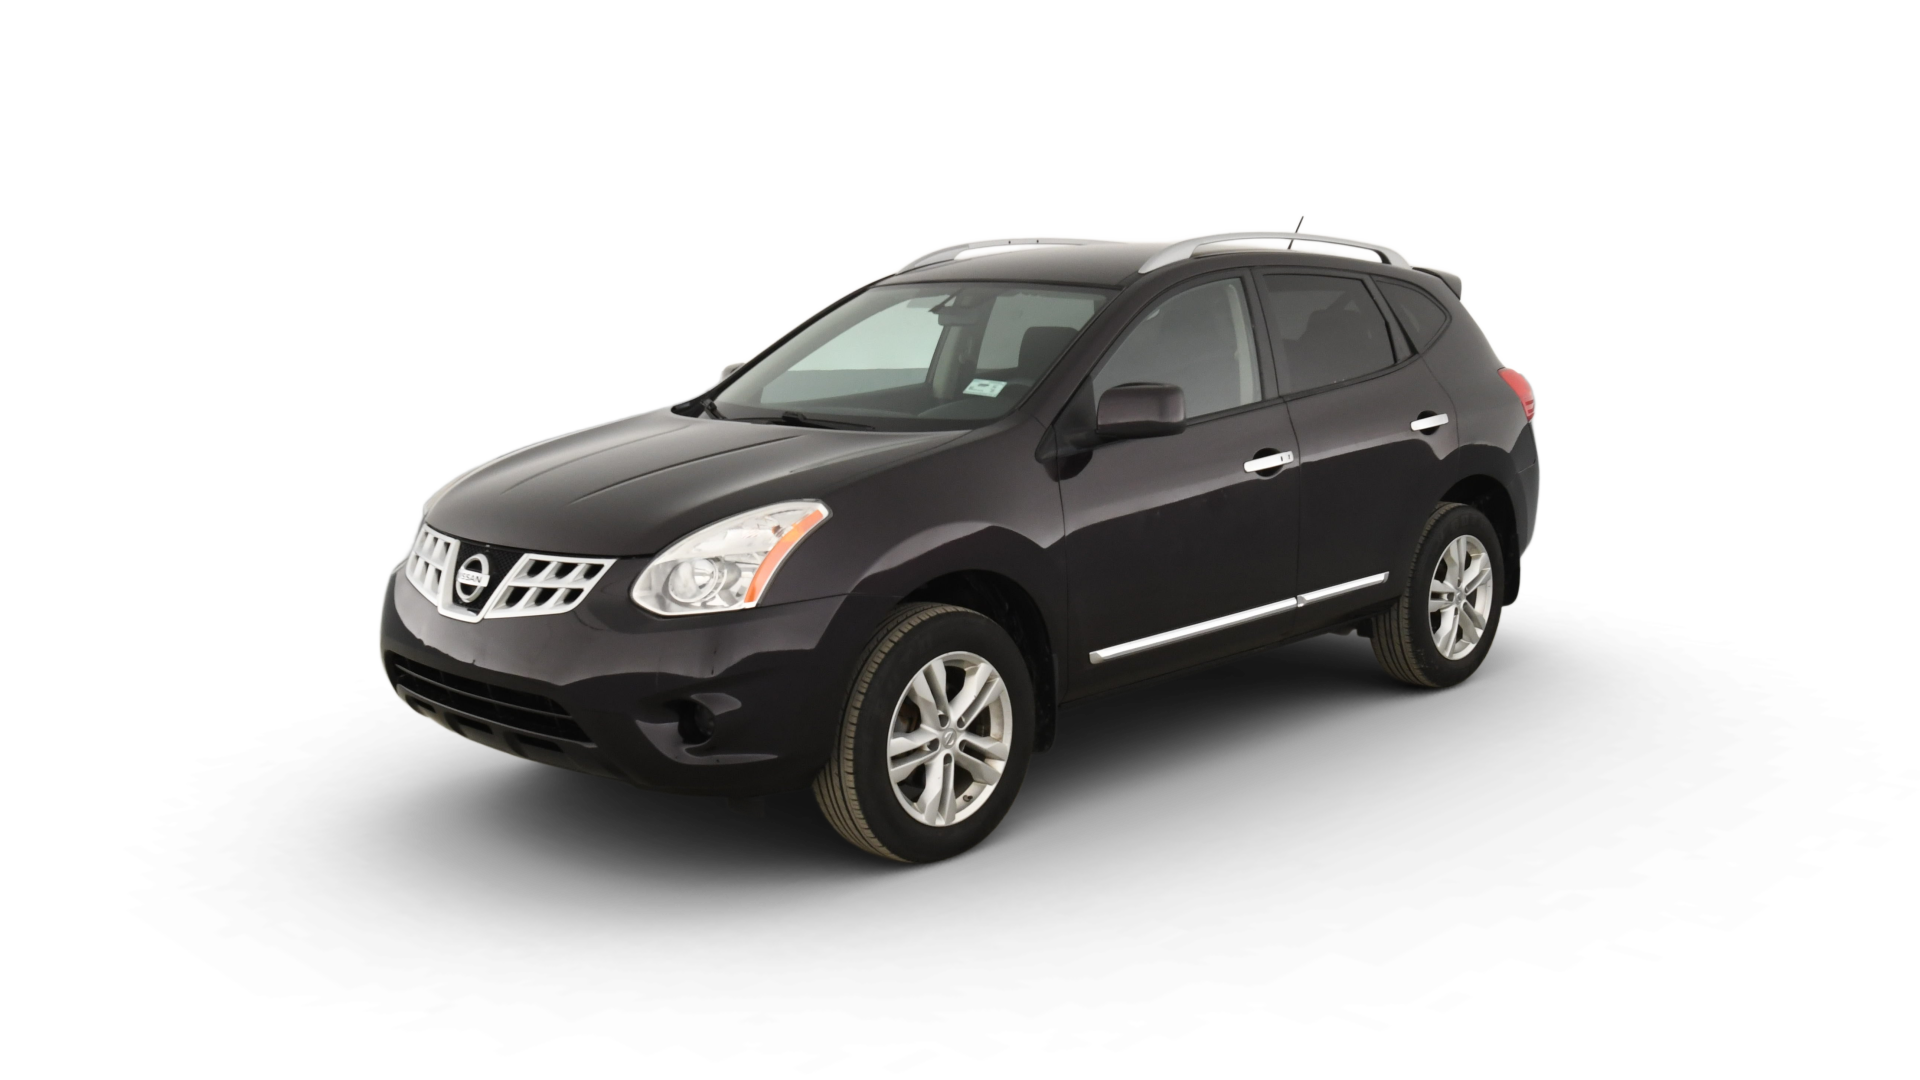 Used 2012 Nissan Rogue For Sale Online | Carvana